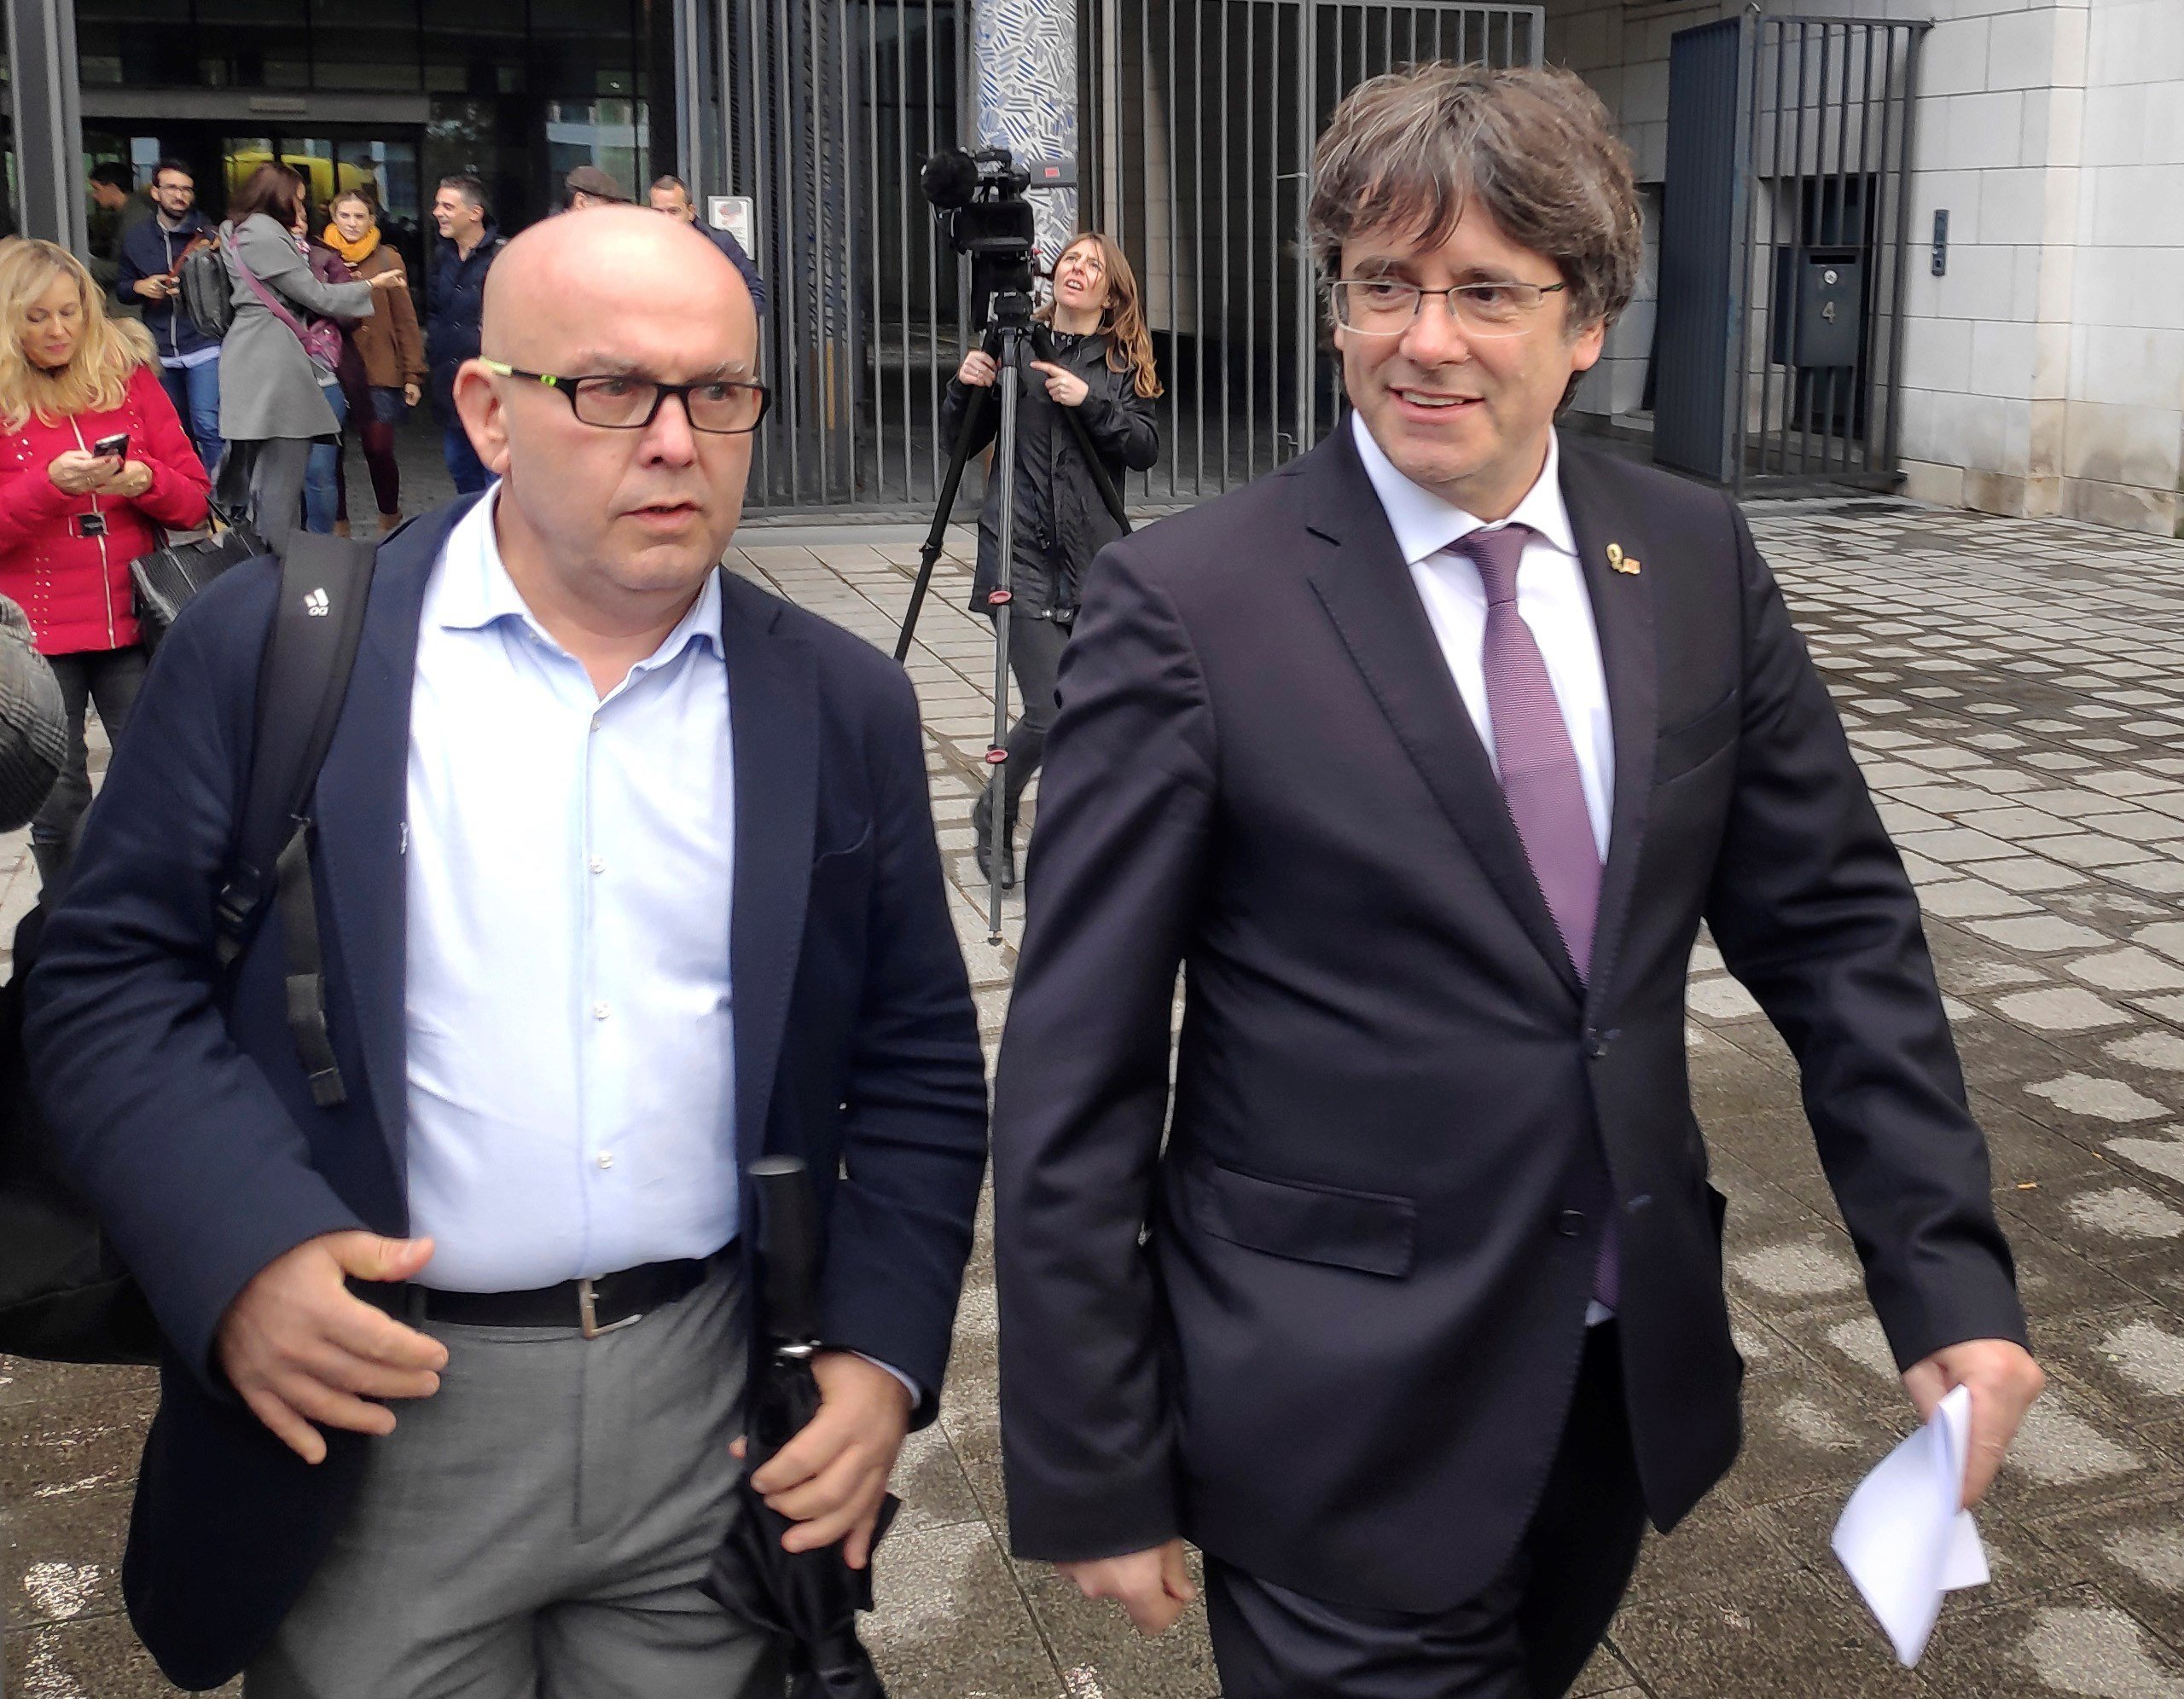 Puigdemont returns to court in key week for Catalan judicial cases in Europe